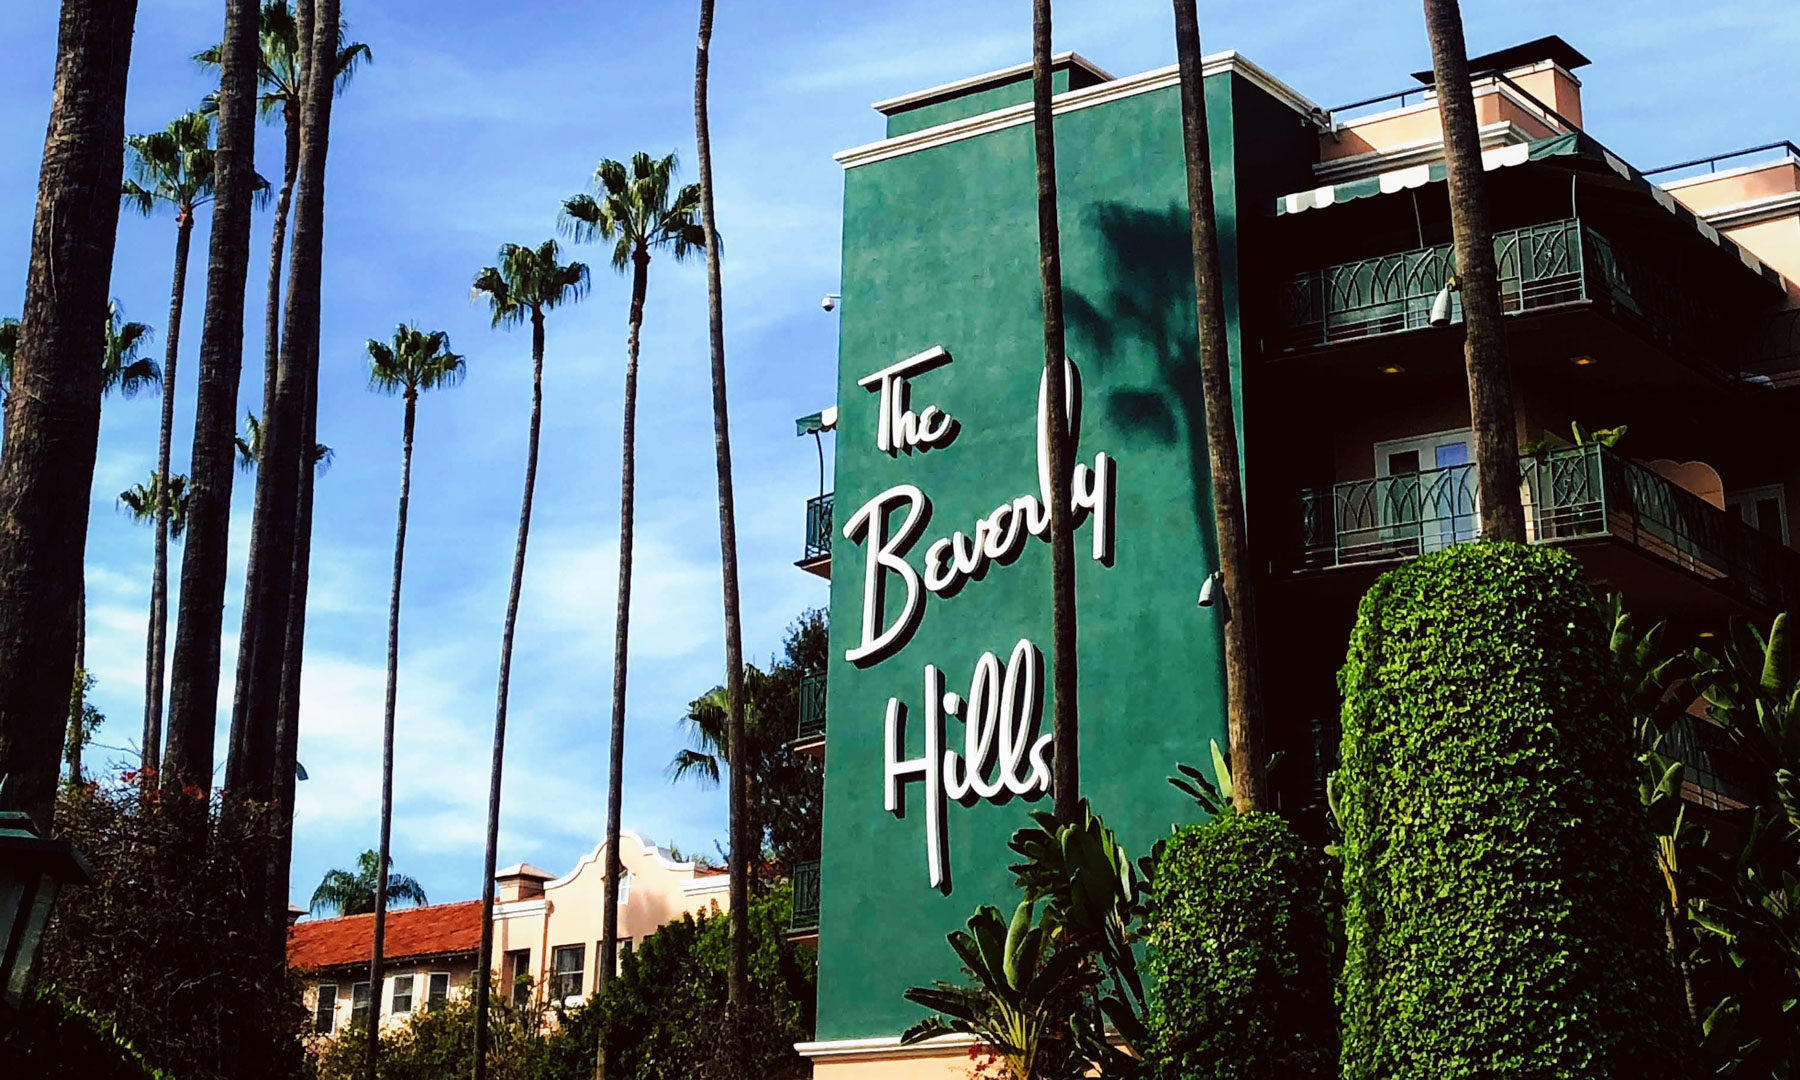 Best Boutique Hotels in Beverly Hills, California